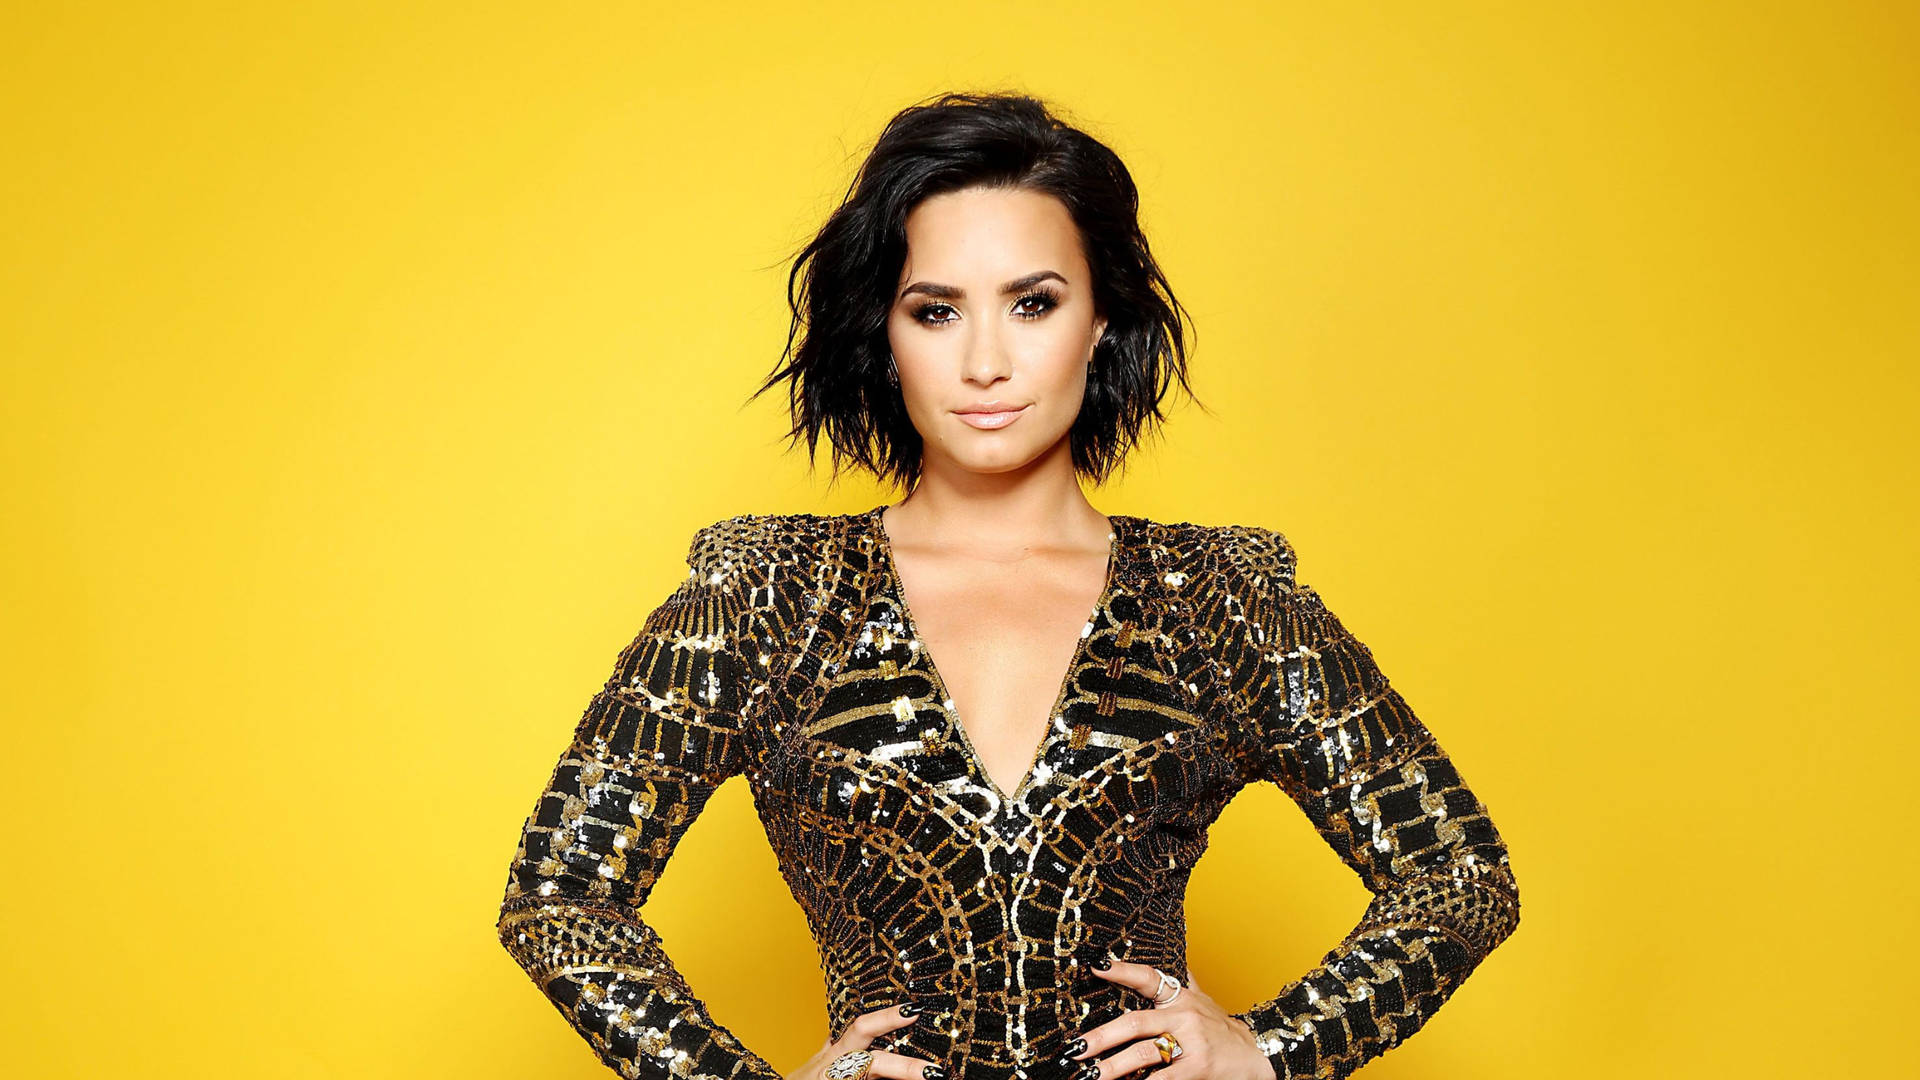 Demi Lovato Black And Gold Outfit Wallpaper